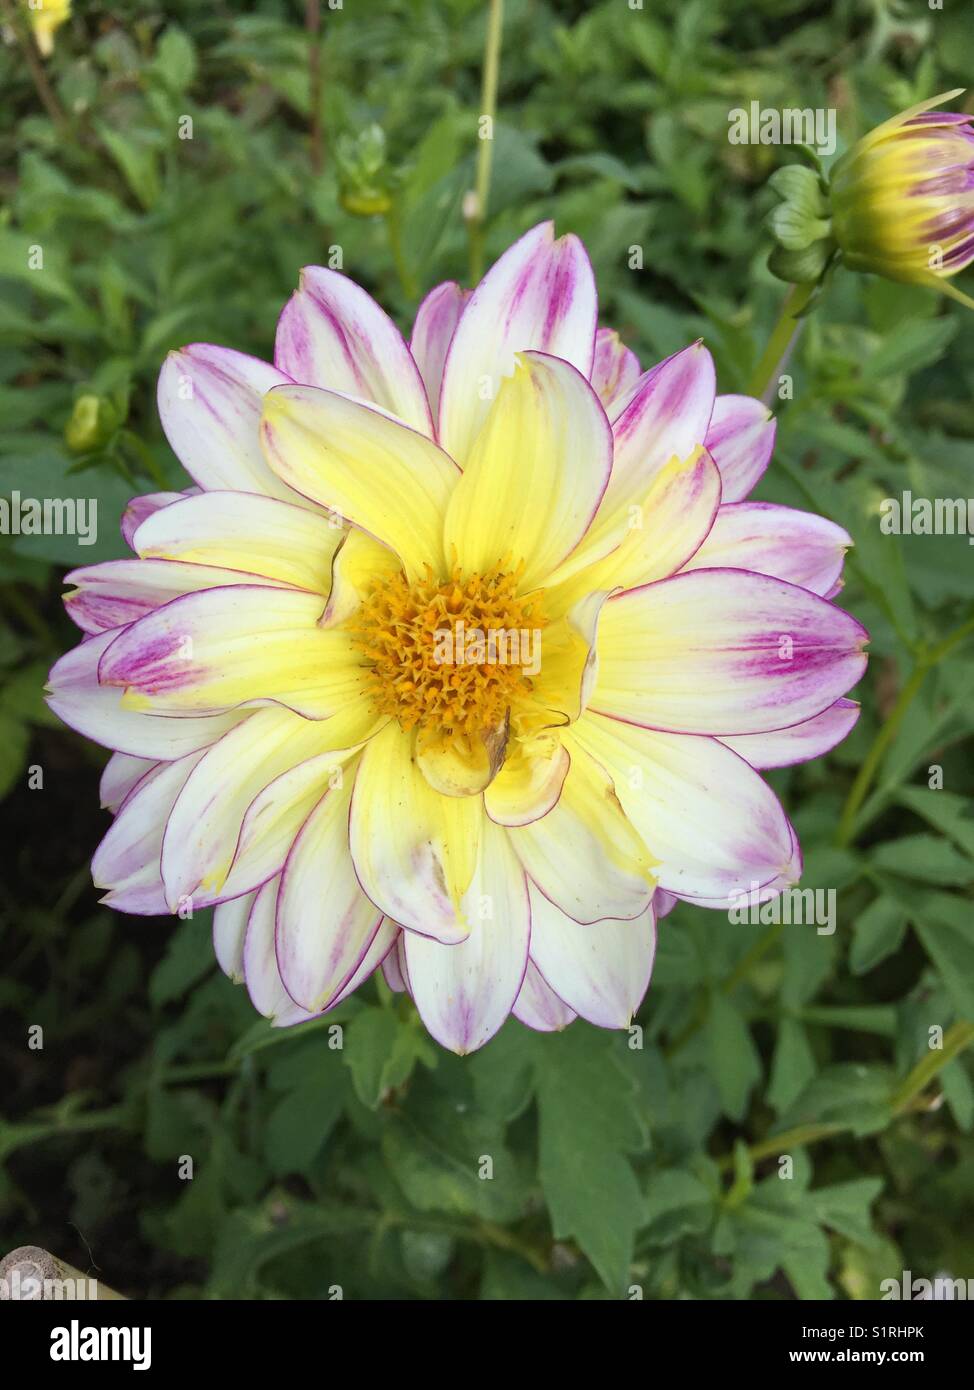 Peony flower Dahlia with petals of yellow, white and purple with green foliage background. Stock Photo